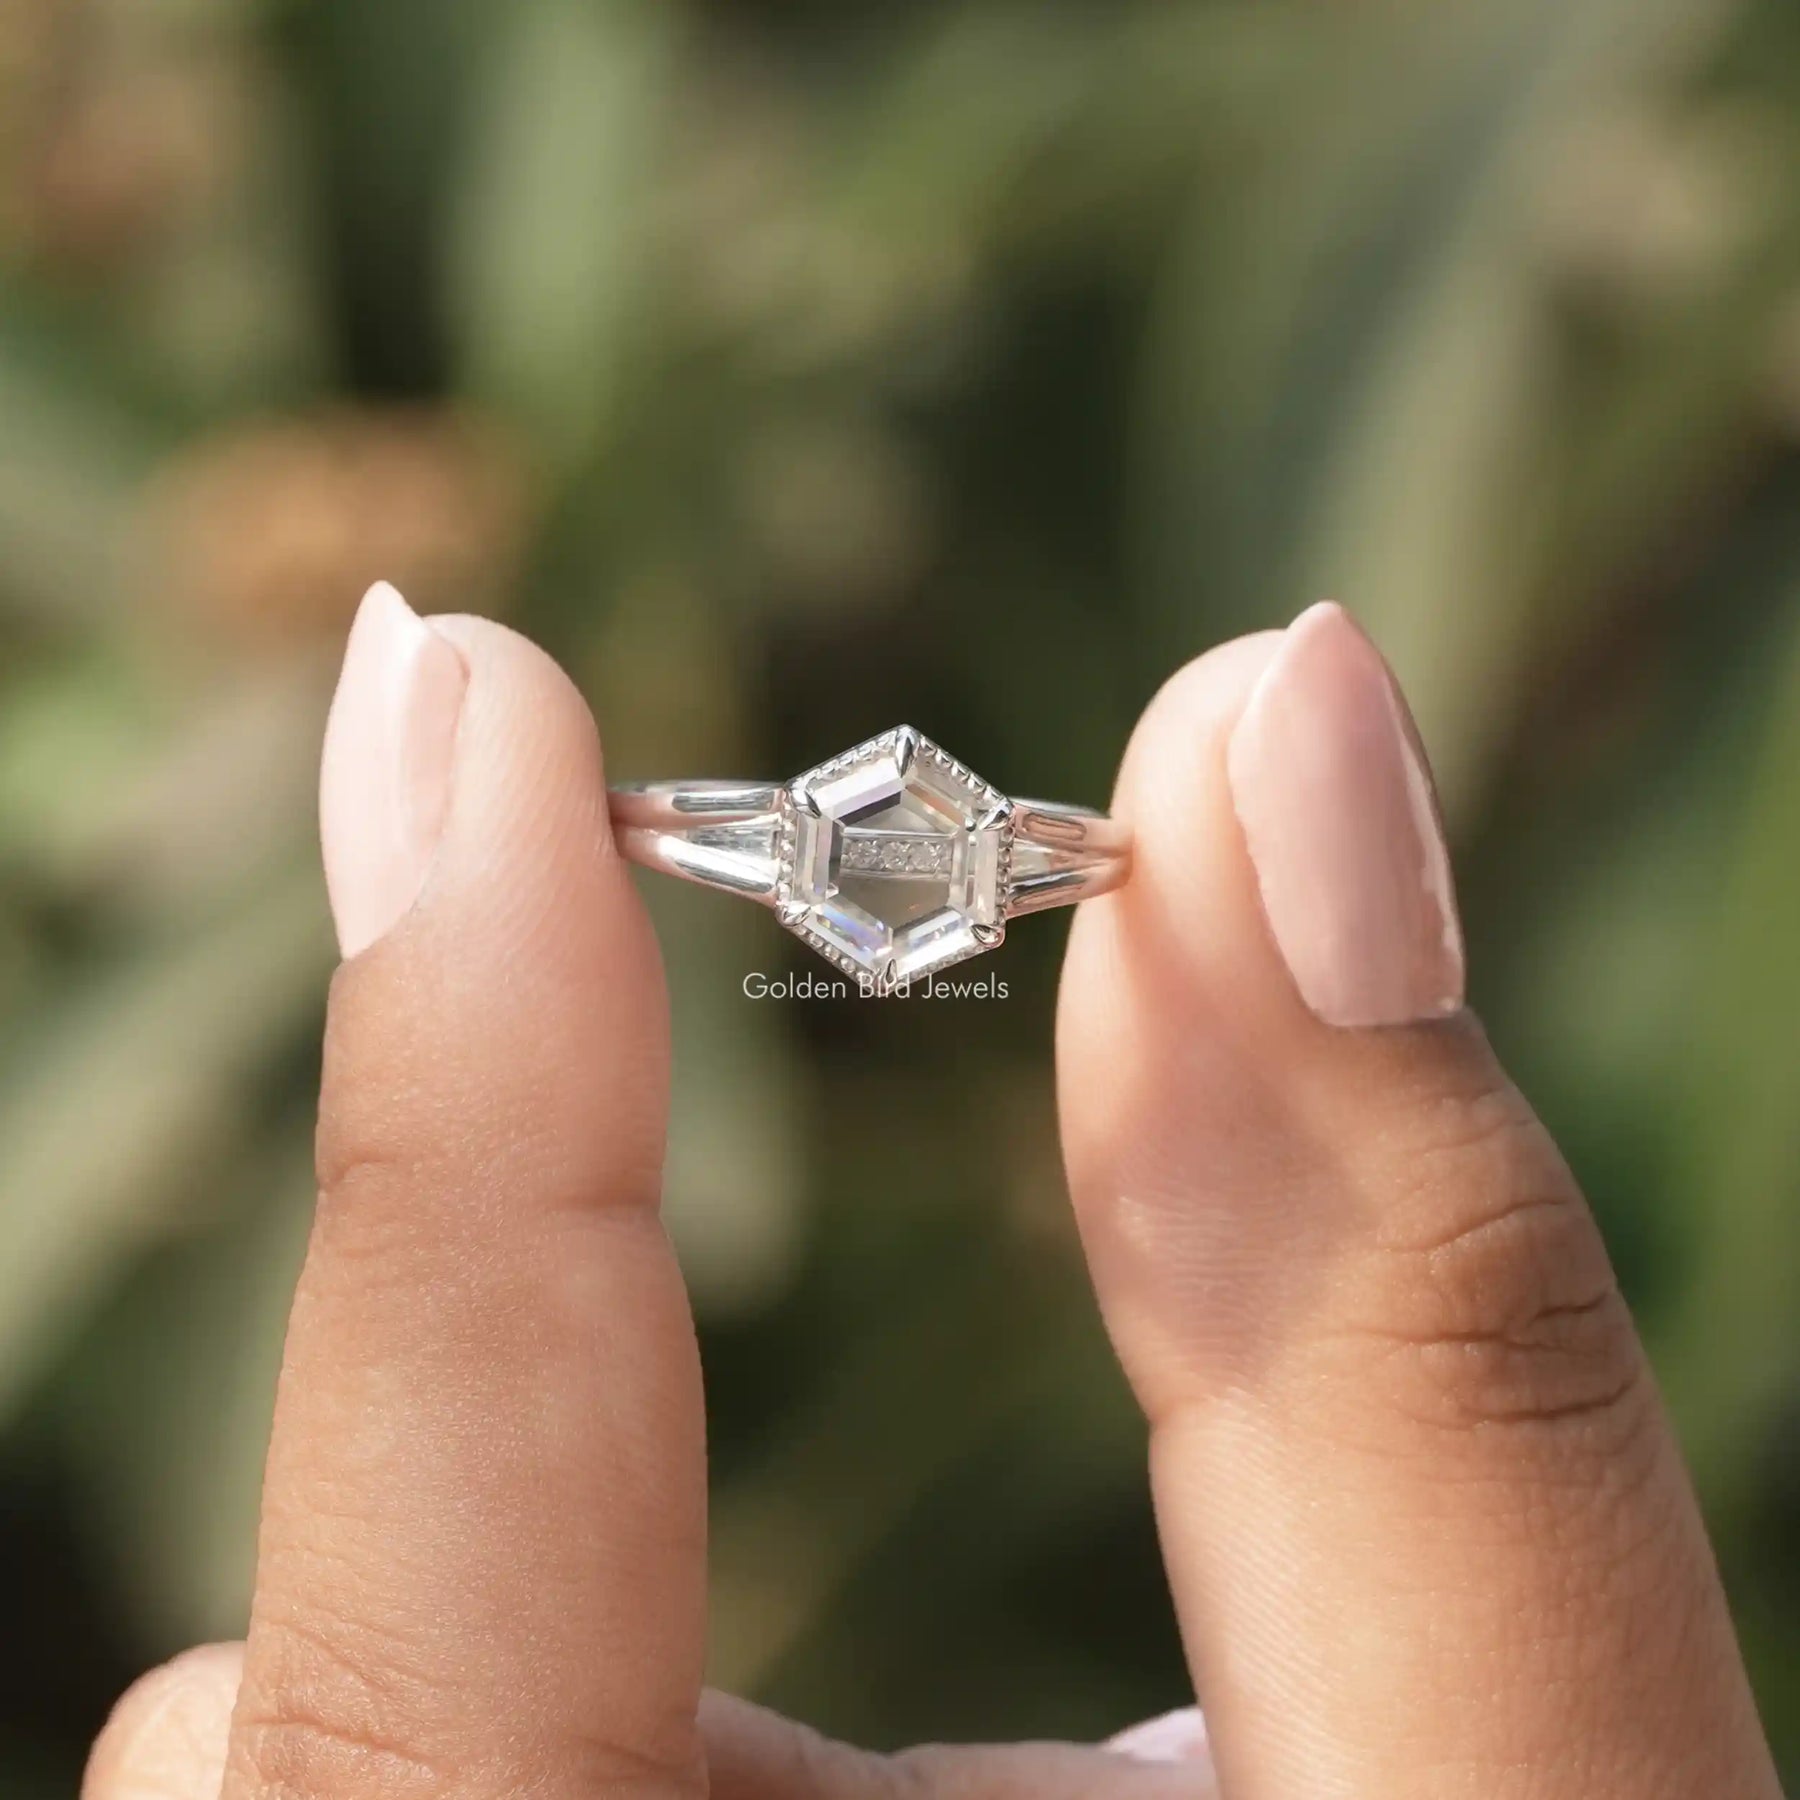 [In two finger front view portrait hexagon cut moissanite ring made of colorless color]-[Golden Bird Jewels]